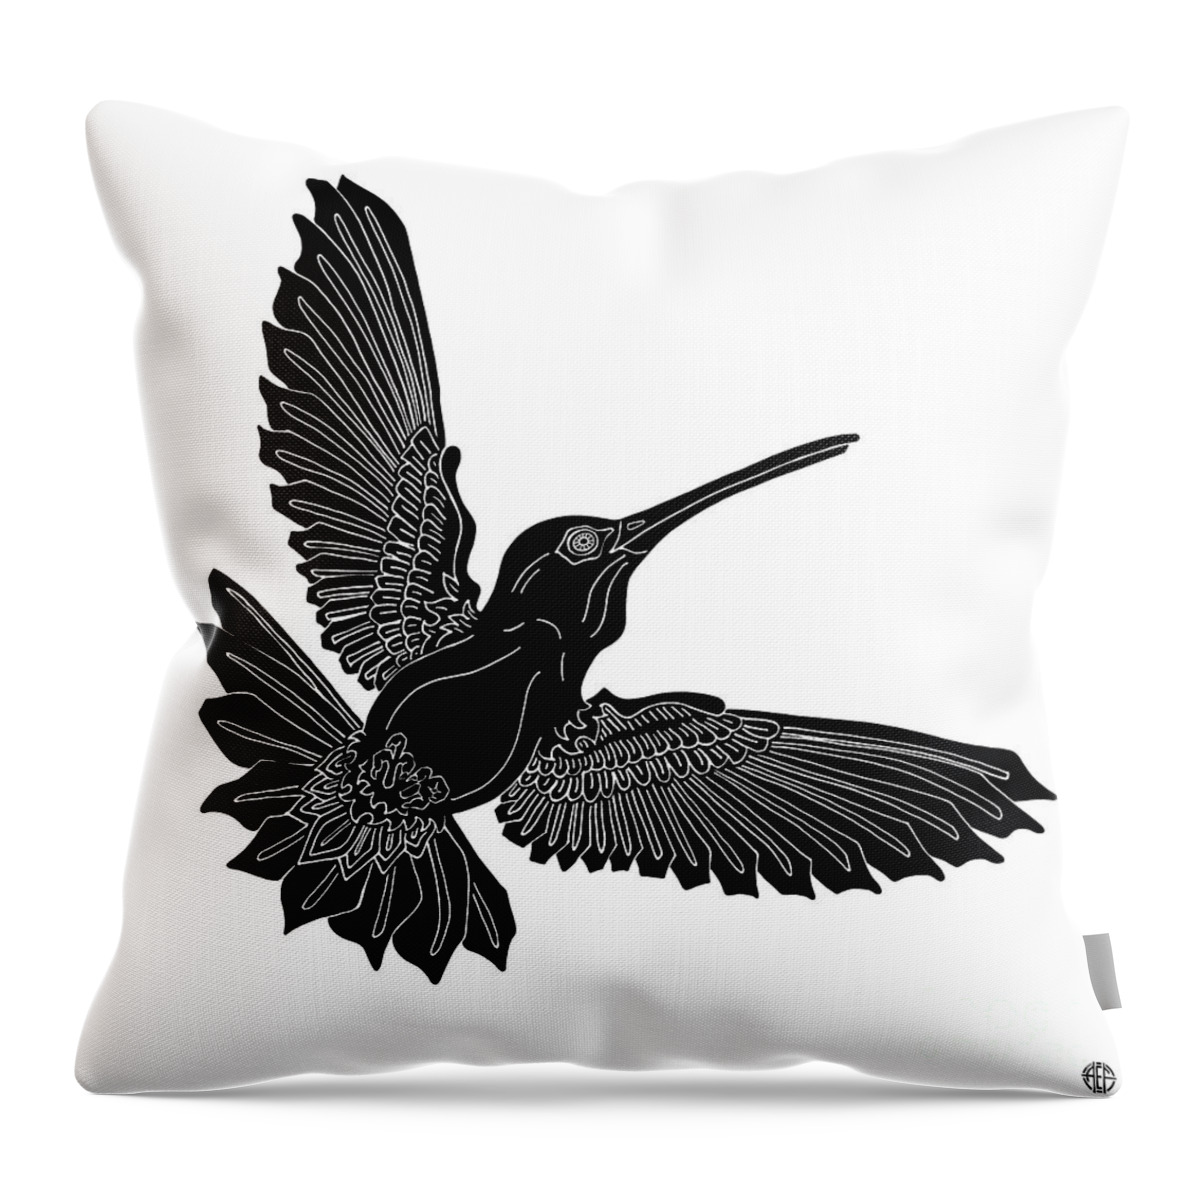 Hummingbird Throw Pillow featuring the drawing Hummingbird Ink 5 by Amy E Fraser